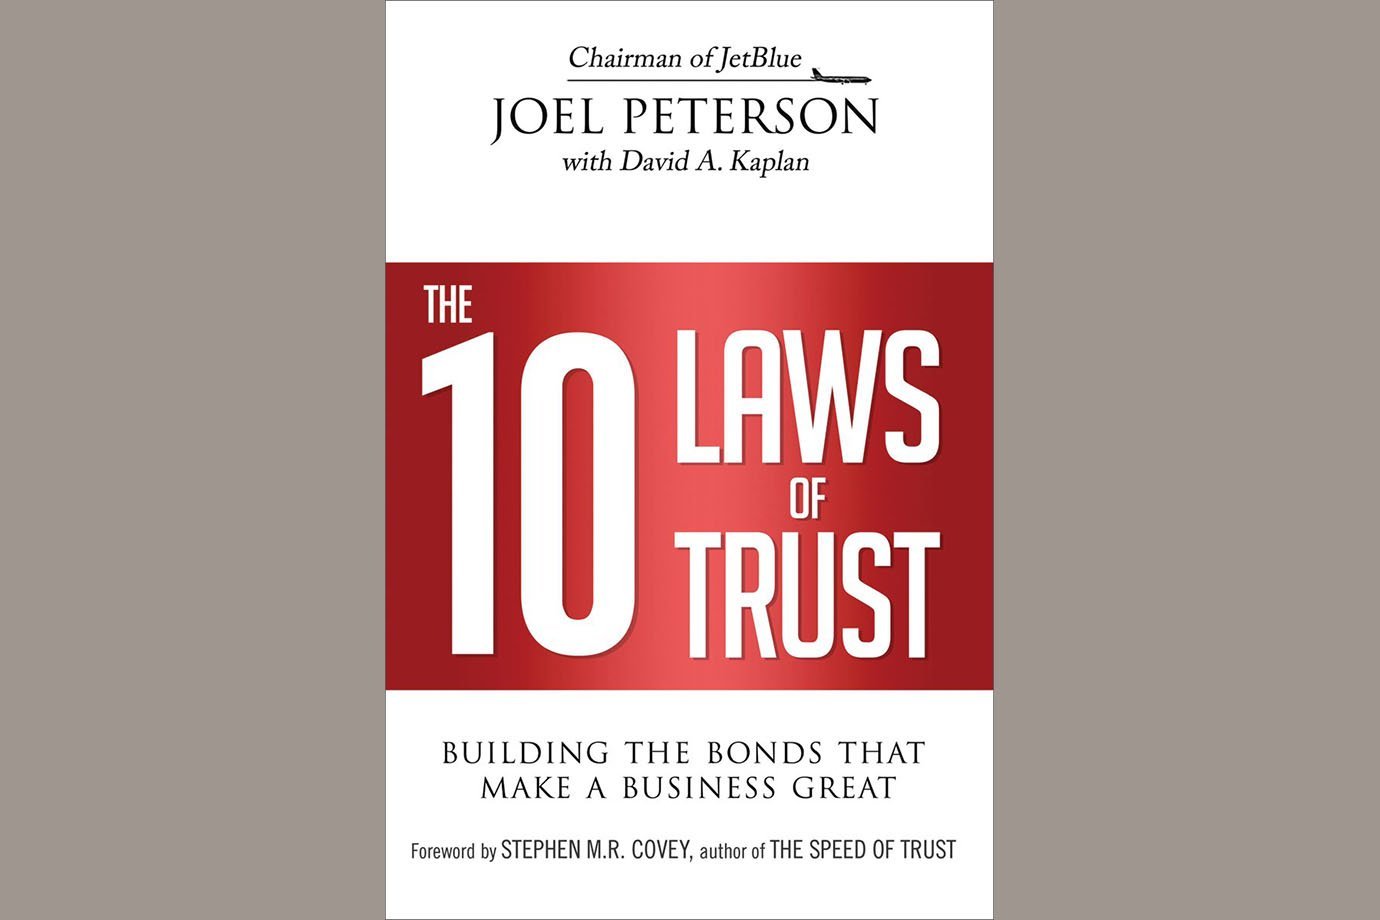 “The 10 Laws of Trust: Building the Bonds That Make a Business Great”